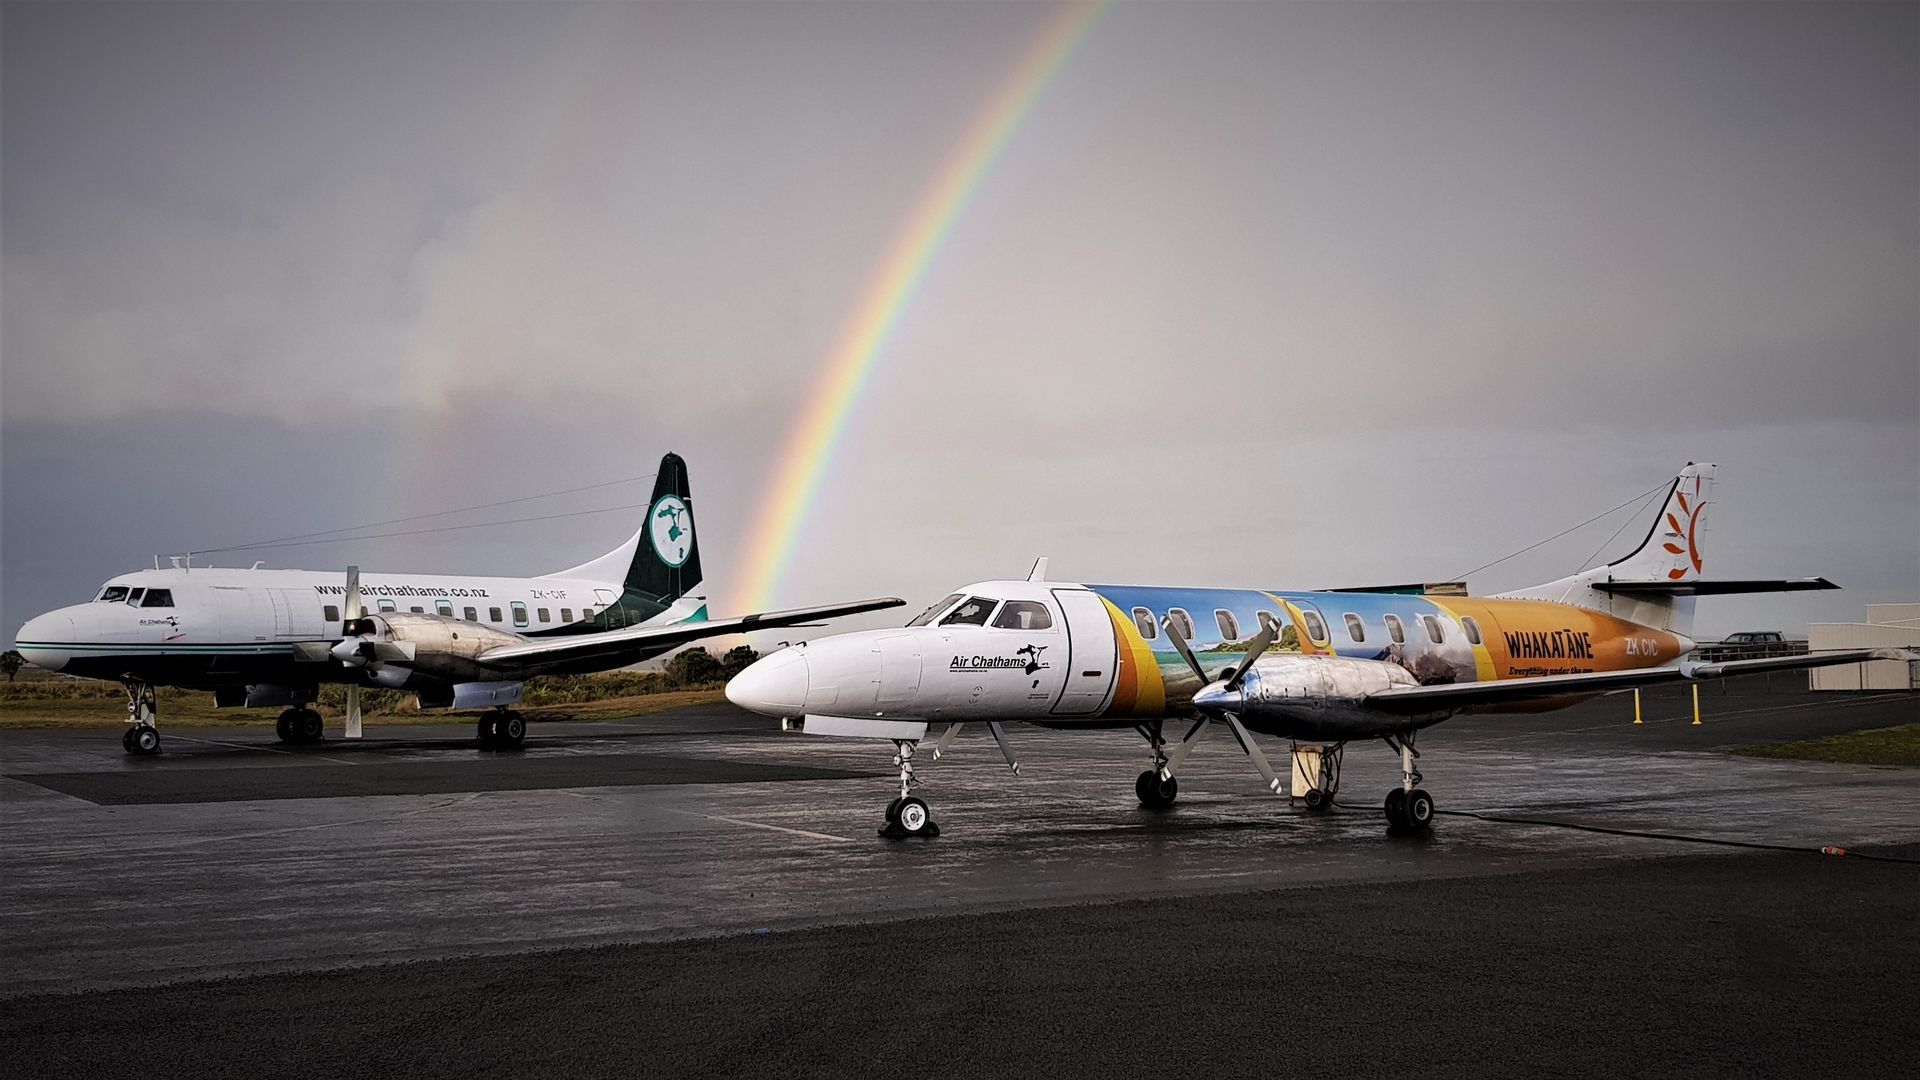 Air Chathams connects regions in New Zealand that no longer are serviced by Air New Zealand